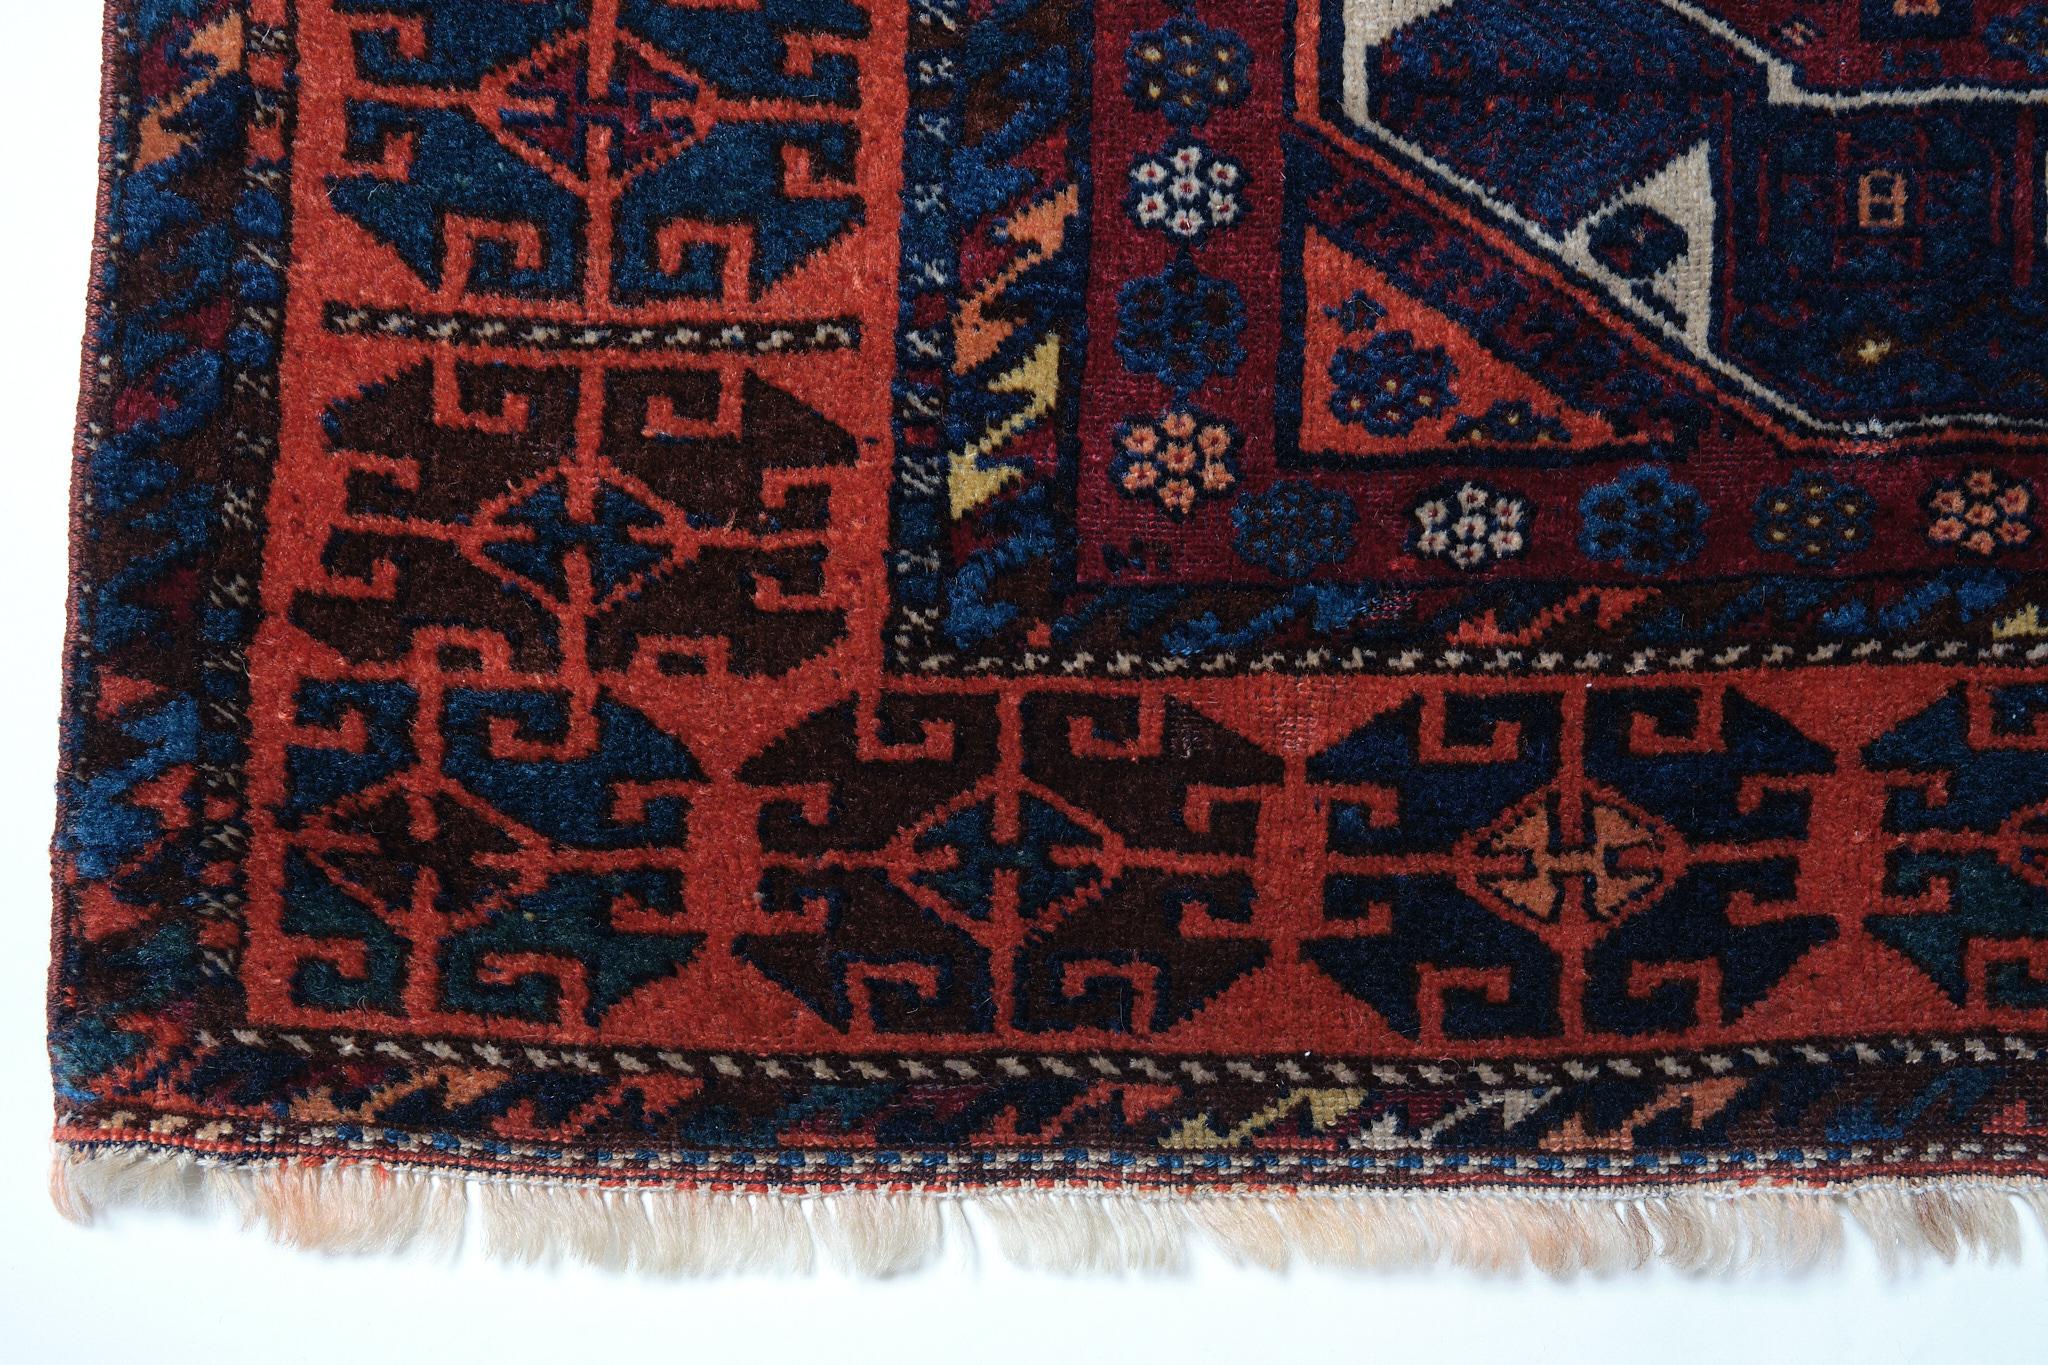 This is an Antique Kurdish Herki Rug from the Eastern Anatolia and Northern Iraqi region with a rare and beautiful color composition.

Iraqi Kurds are mainly concentrated within a mountainous region of north and north-east Iraq. Originally a Central